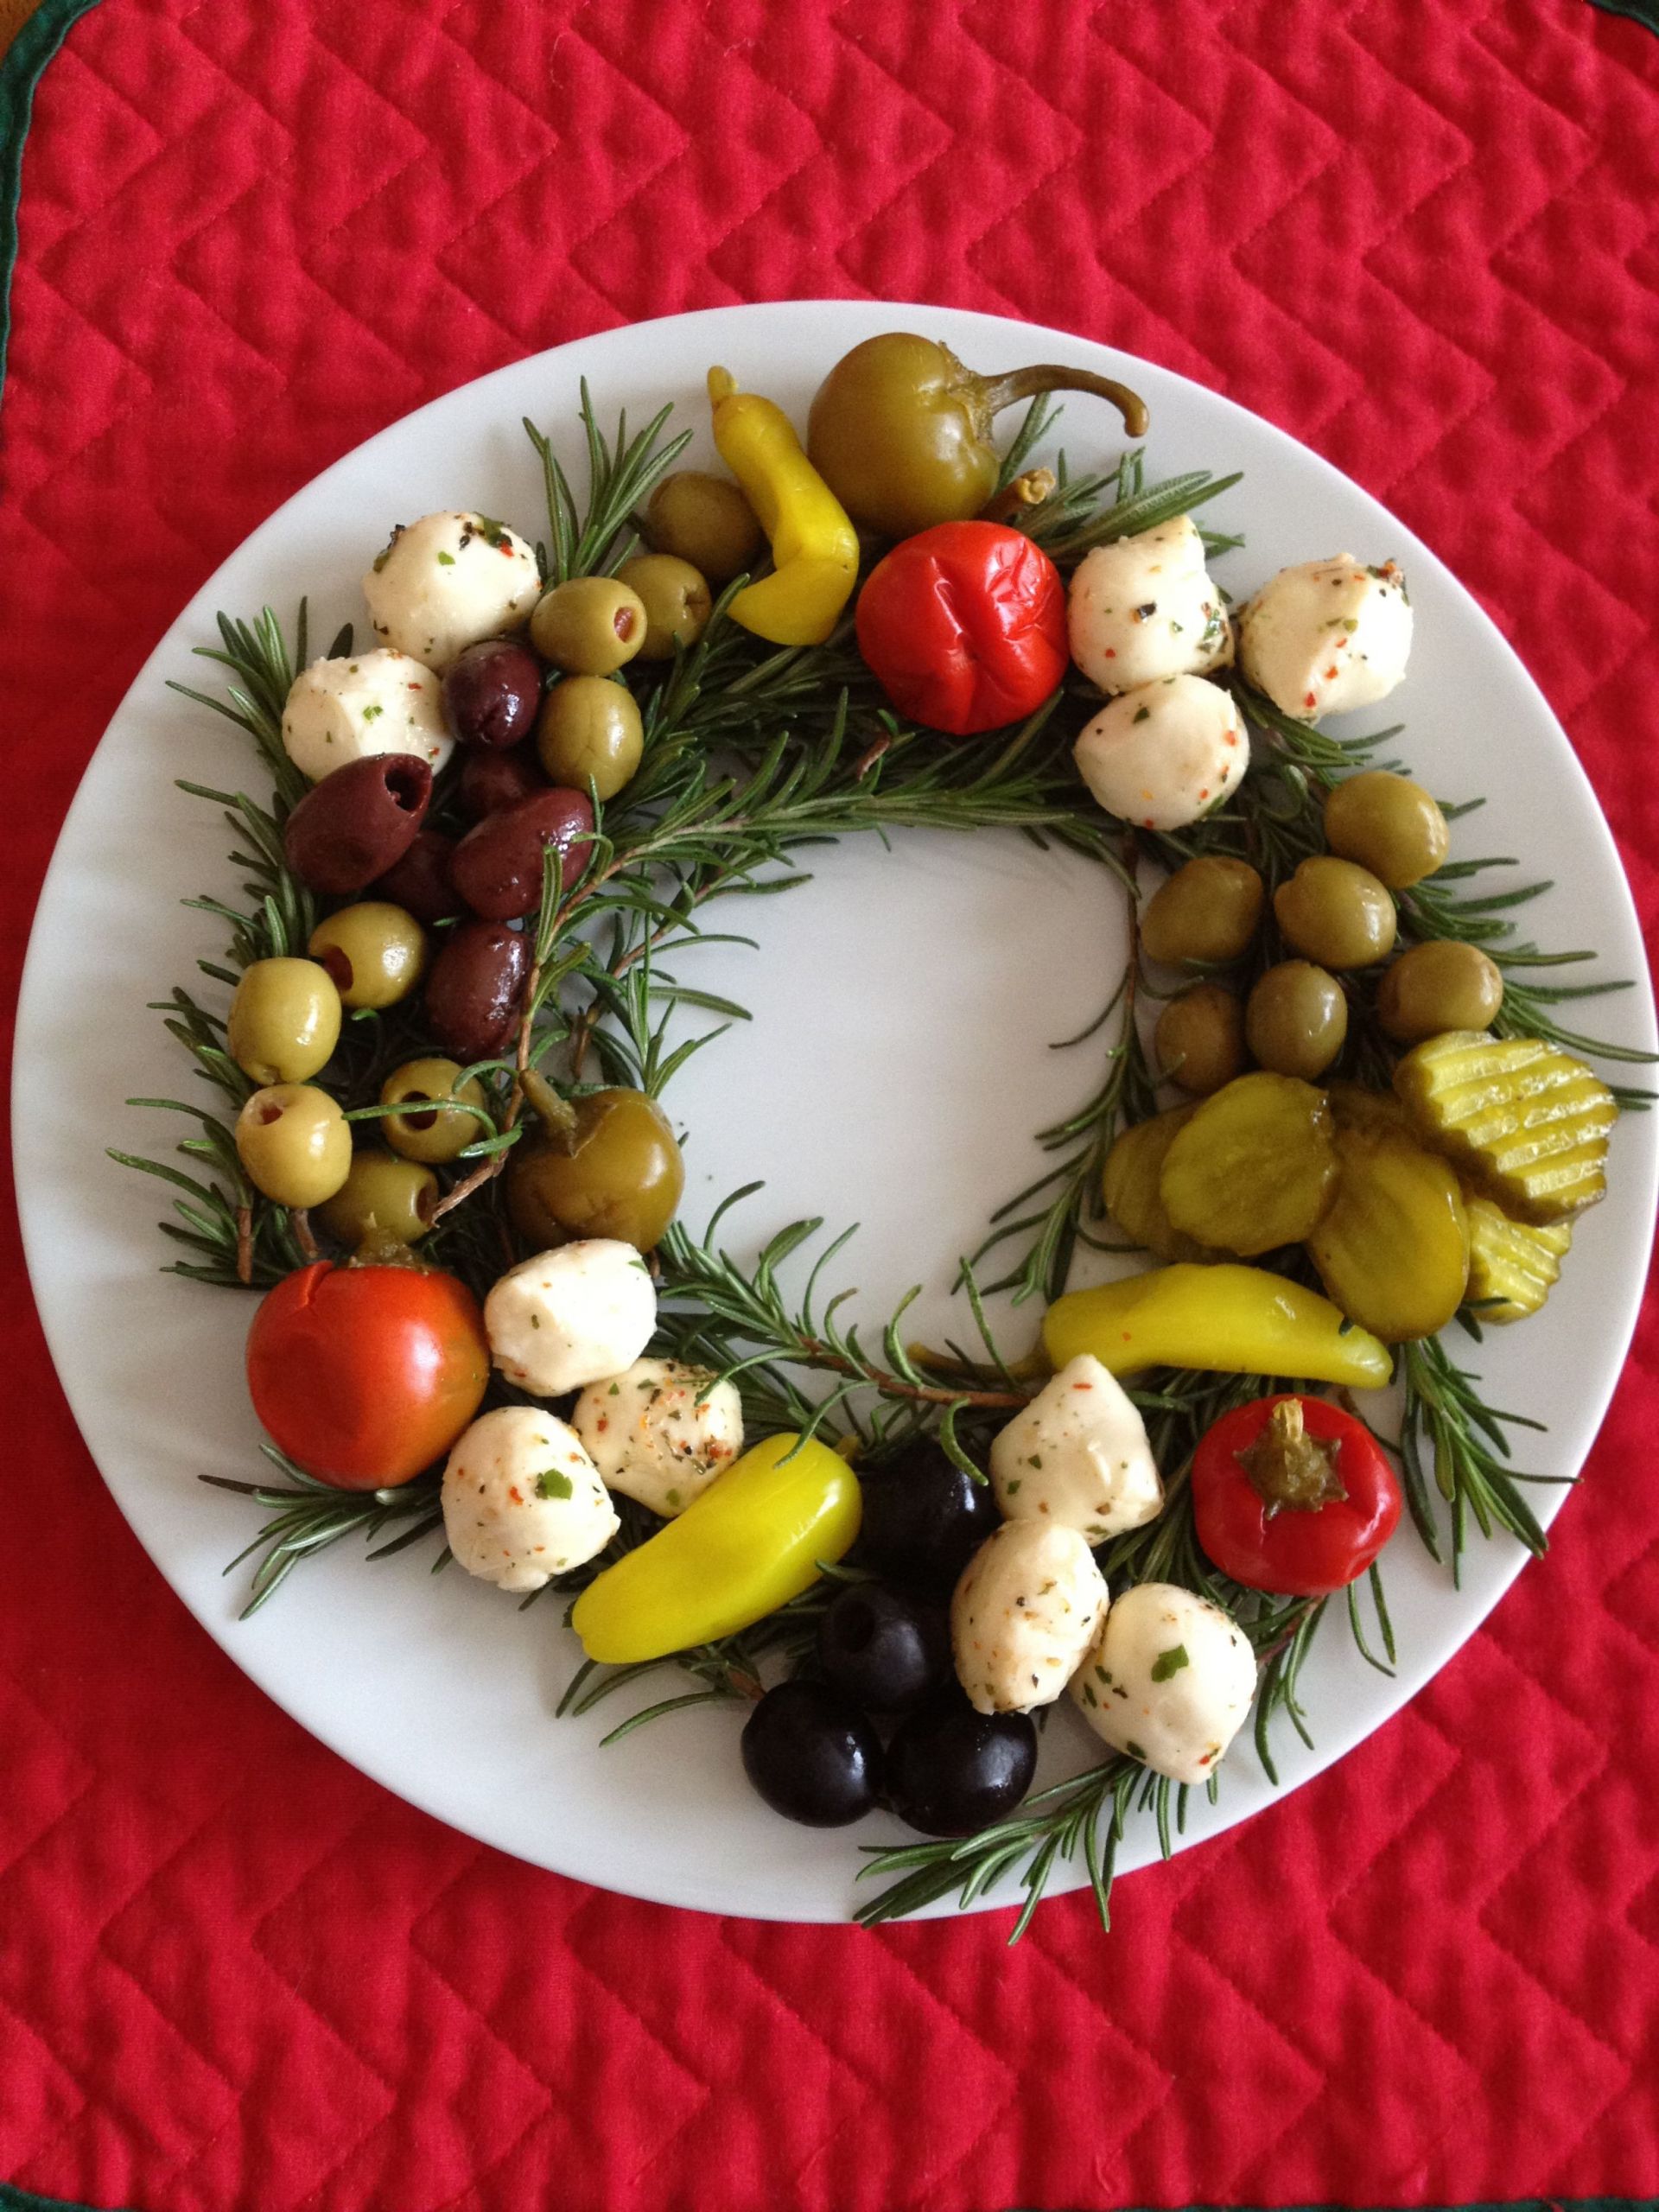 Holiday Cocktail Party Food Ideas
 Antipasto wreath